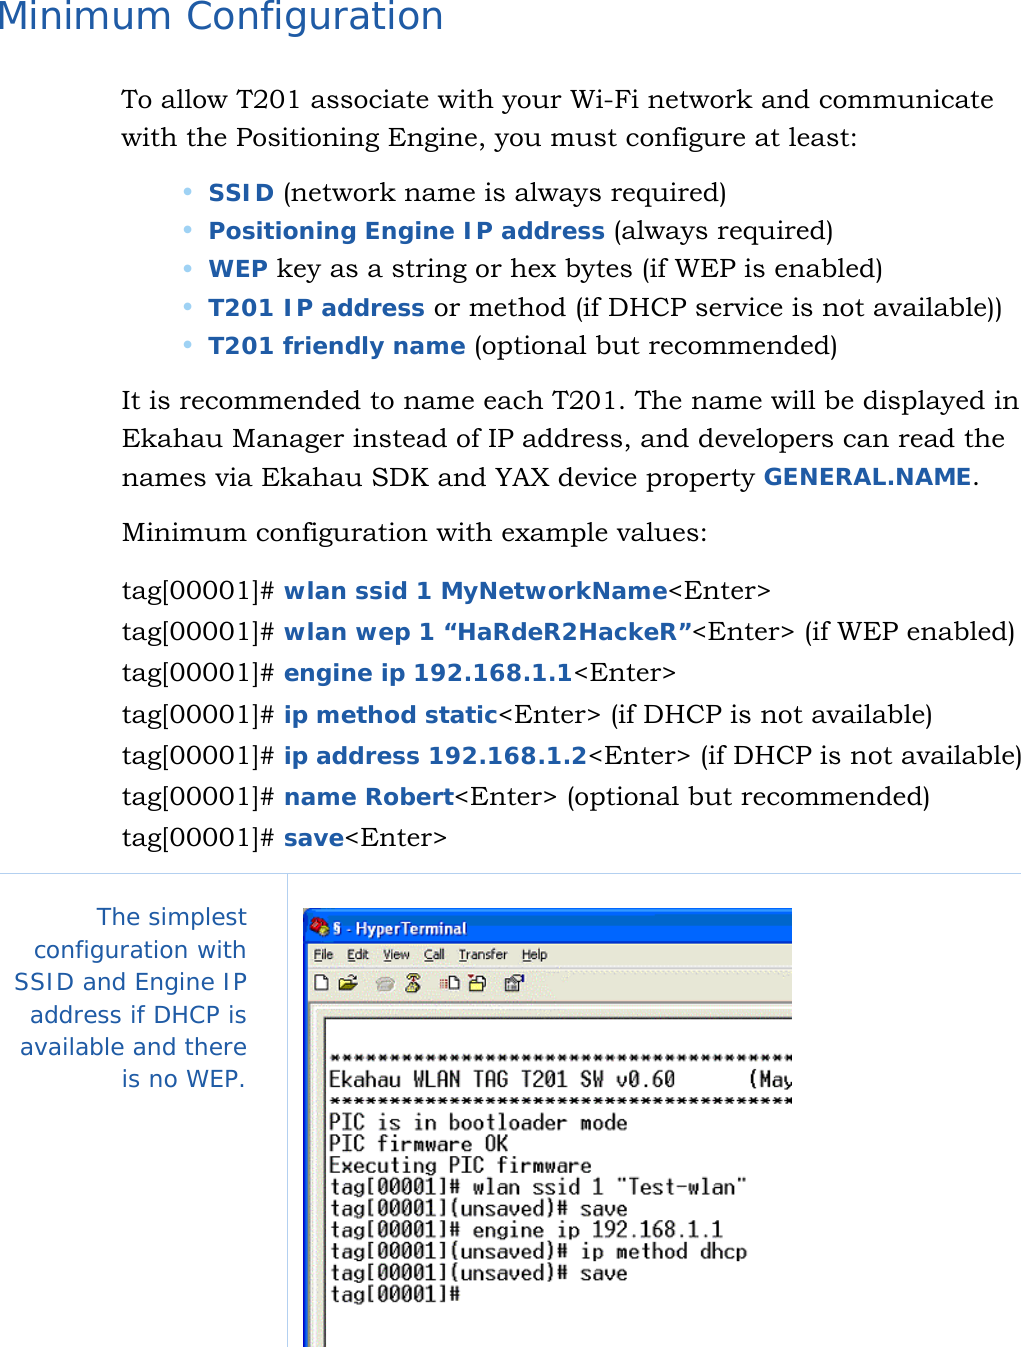   12 Minimum Configuration To allow T201 associate with your Wi-Fi network and communicate with the Positioning Engine, you must configure at least:  SSID (network name is always required)  Positioning Engine IP address (always required)  WEP key as a string or hex bytes (if WEP is enabled)  T201 IP address or method (if DHCP service is not available))  T201 friendly name (optional but recommended) It is recommended to name each T201. The name will be displayed in Ekahau Manager instead of IP address, and developers can read the names via Ekahau SDK and YAX device property GENERAL.NAME. Minimum configuration with example values: tag[00001]# wlan ssid 1 MyNetworkName&lt;Enter&gt;                        tag[00001]# wlan wep 1 “HaRdeR2HackeR”&lt;Enter&gt; (if WEP enabled)              tag[00001]# engine ip 192.168.1.1&lt;Enter&gt;                          tag[00001]# ip method static&lt;Enter&gt; (if DHCP is not available)                        tag[00001]# ip address 192.168.1.2&lt;Enter&gt; (if DHCP is not available)             tag[00001]# name Robert&lt;Enter&gt; (optional but recommended)                        tag[00001]# save&lt;Enter&gt; The simplest configuration with SSID and Engine IP address if DHCP is available and there is no WEP.     